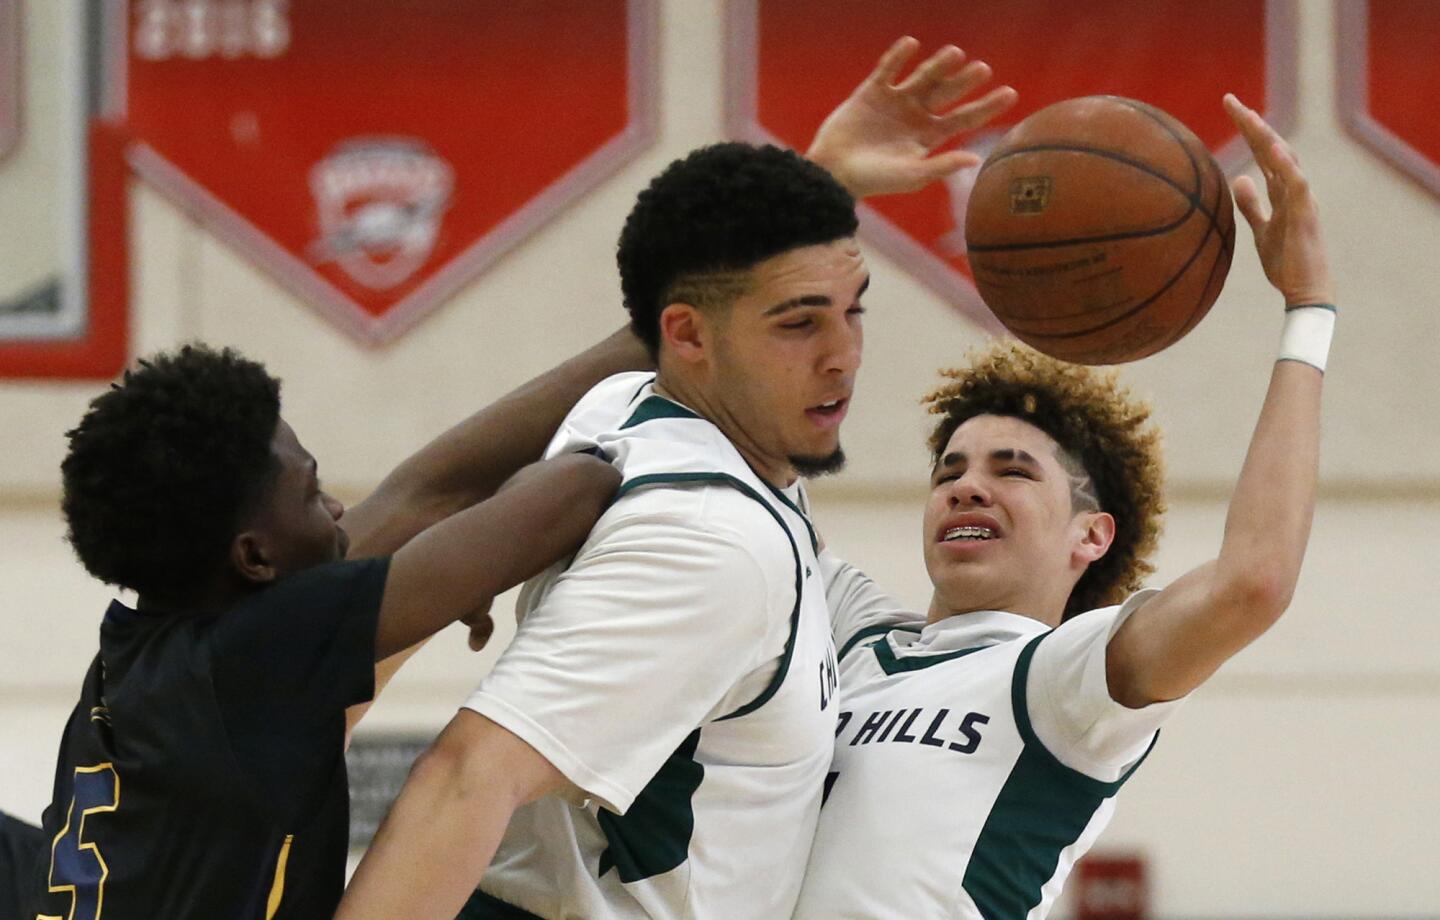 Birmingham's Devonaire Doutrive, left, battles Chino Hills brothers LiAngelo Ball, middle, and LaMelo Ball for control of the ball during the first quarter.